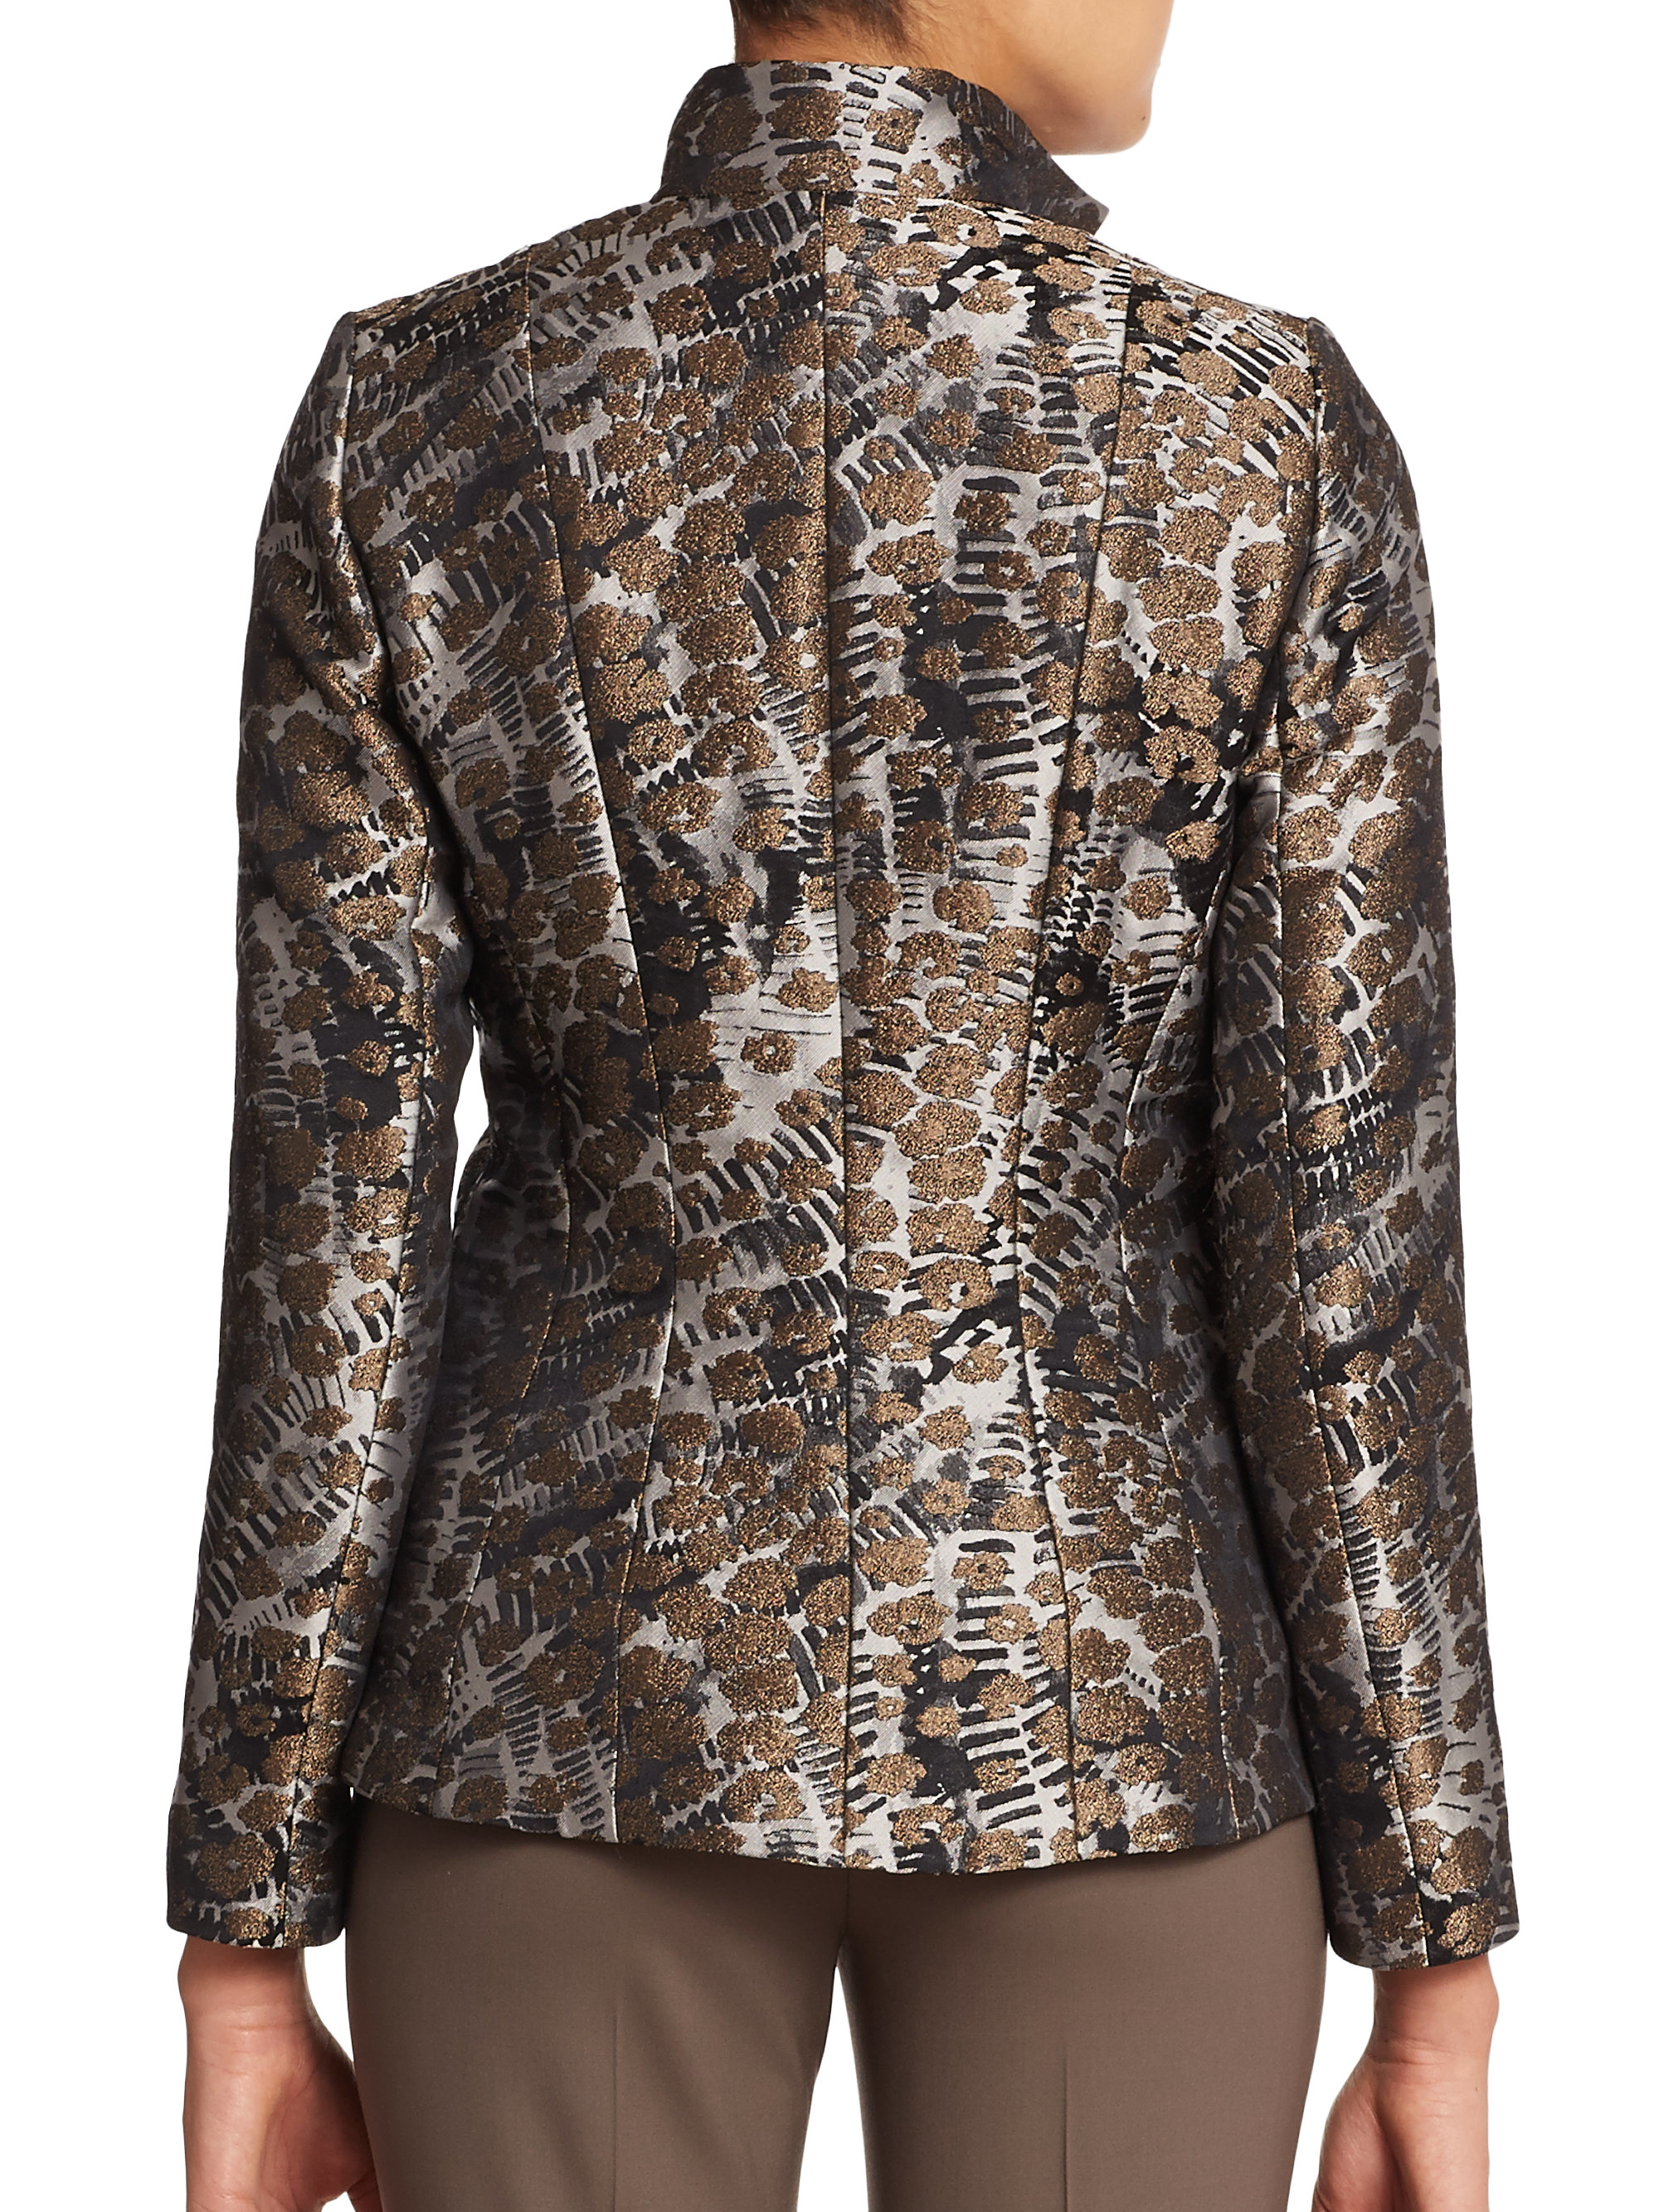 Lyst - Lafayette 148 New York Maris Abstract Print Jacket in Brown